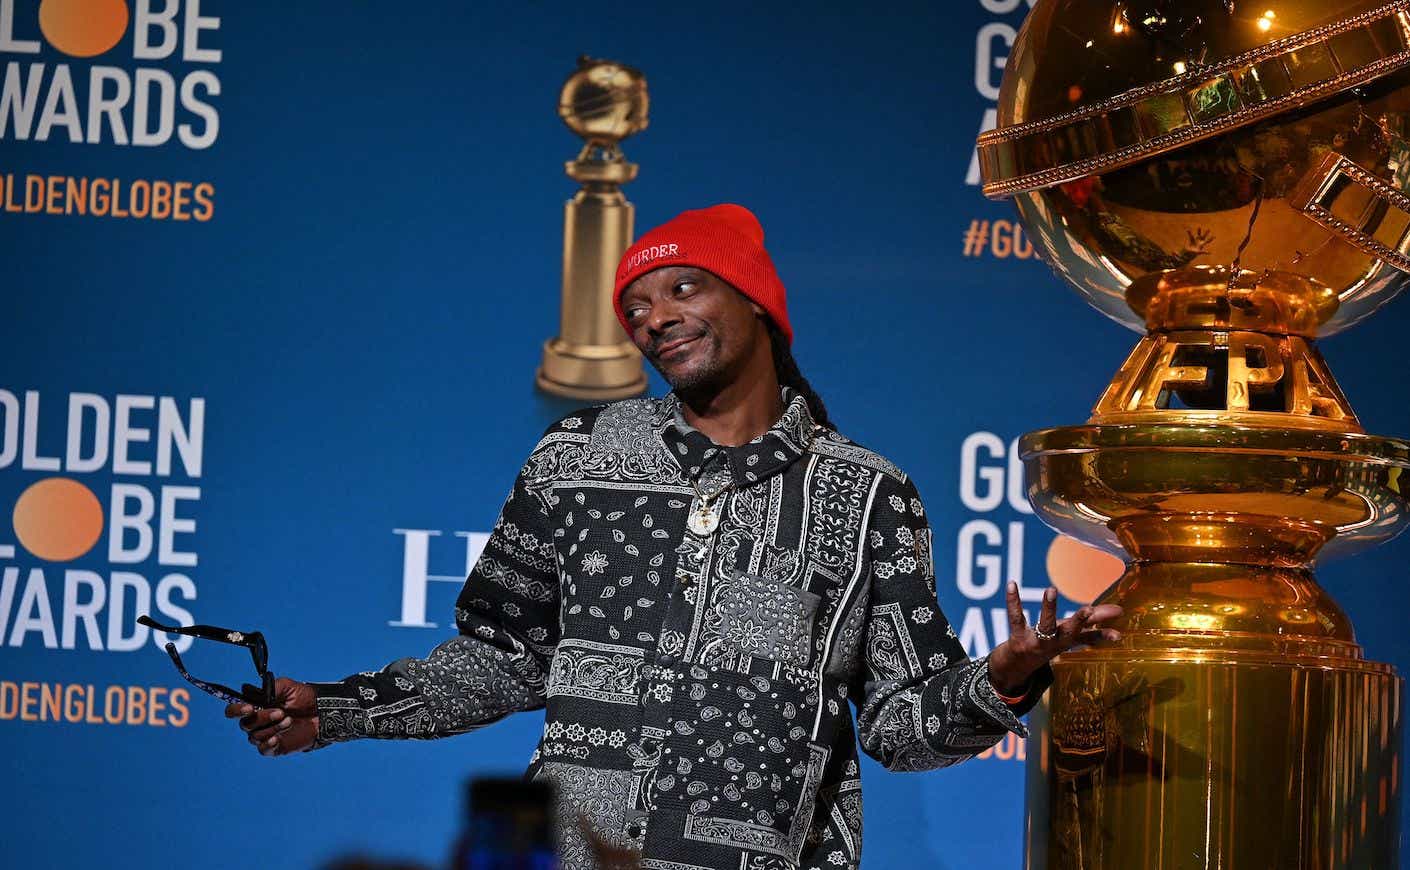 snoop dogg shrugging on stage next to golden globe statue